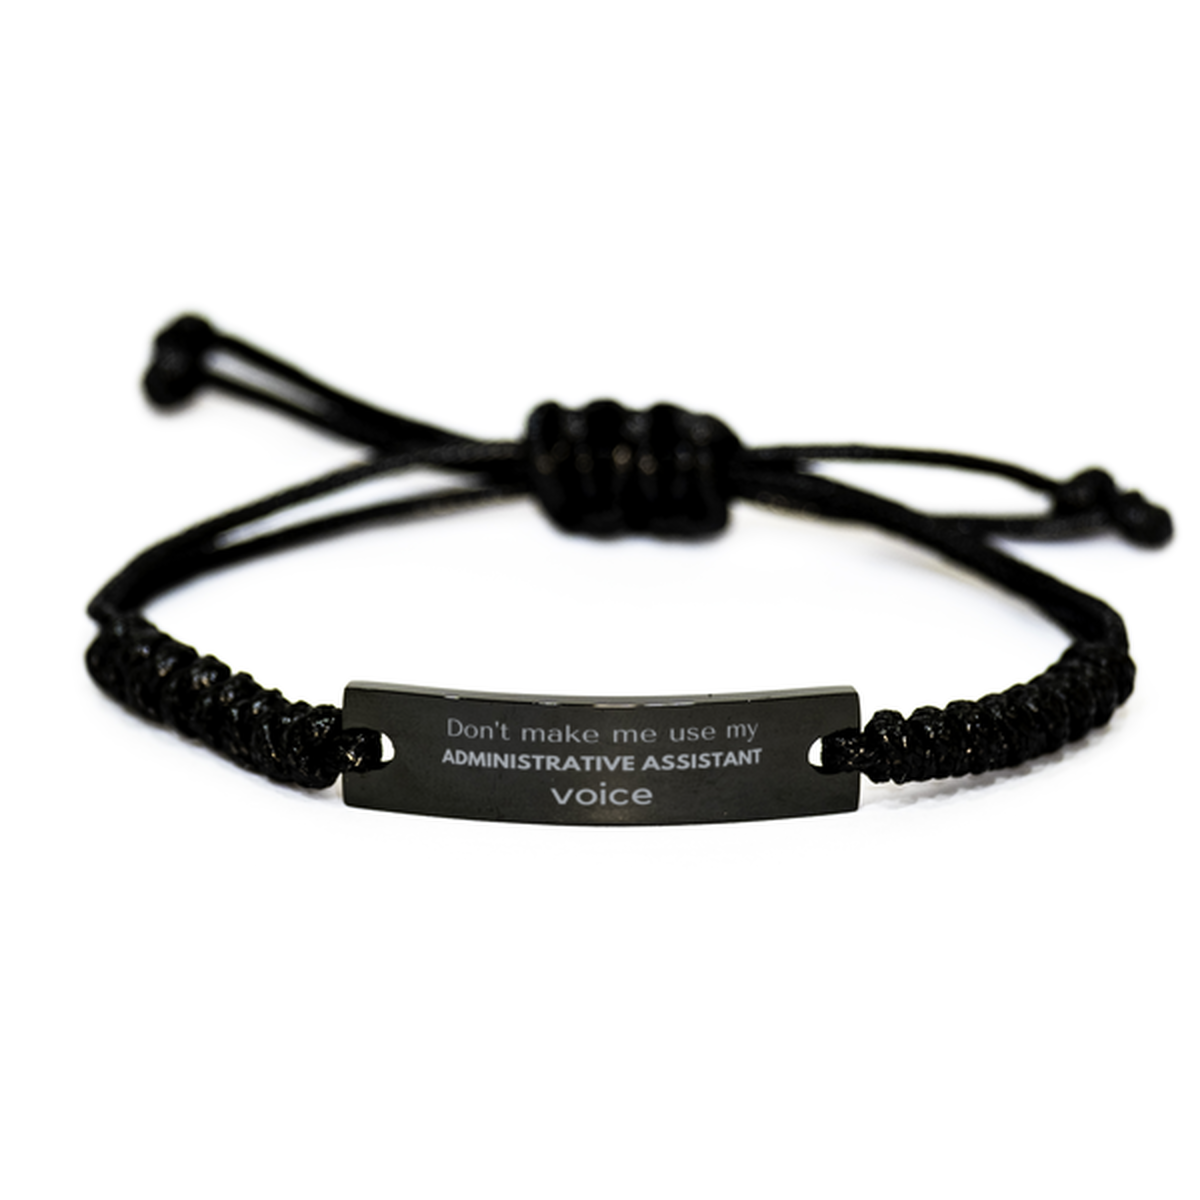 Don't make me use my Administrative Assistant voice, Sarcasm Administrative Assistant Gifts, Christmas Administrative Assistant Black Rope Bracelet Birthday Unique Gifts For Administrative Assistant Coworkers, Men, Women, Colleague, Friends